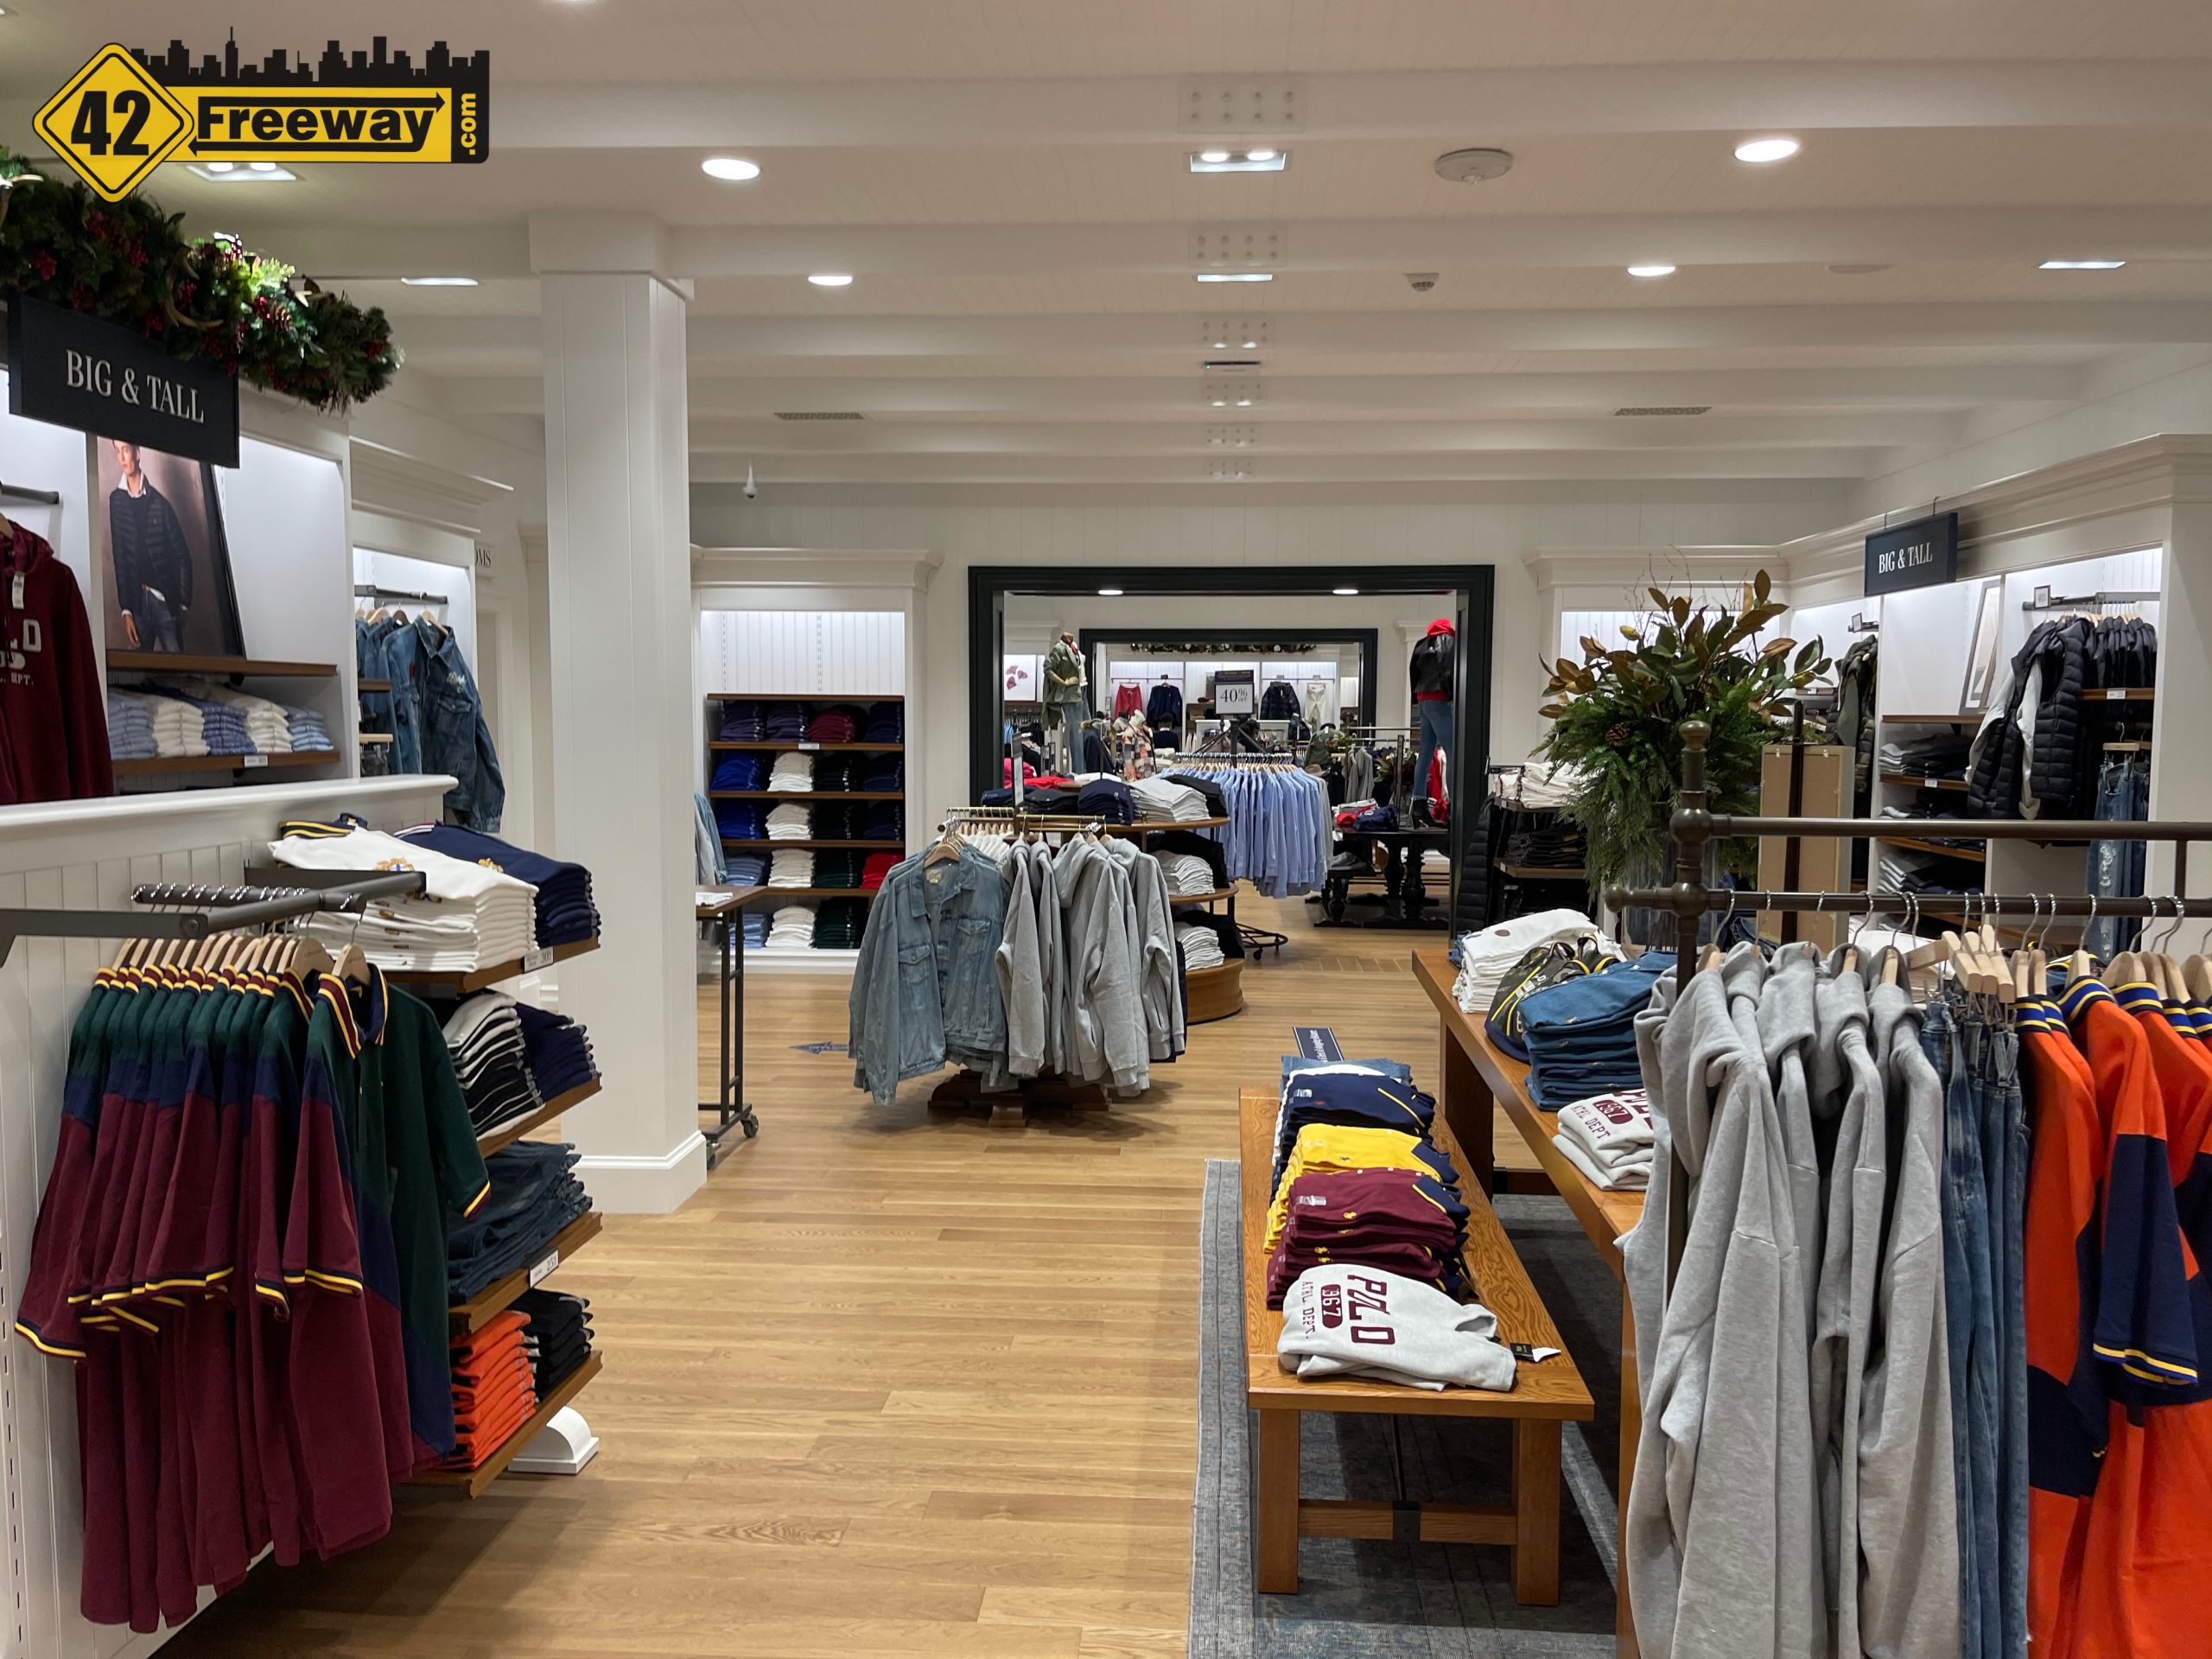 Inspireren Medic Wreed Larger Polo Ralph Lauren Factory Store is Open at Gloucester Premium Outlets.  Attractive Store Has a Higher End "Feel" - 42 Freeway